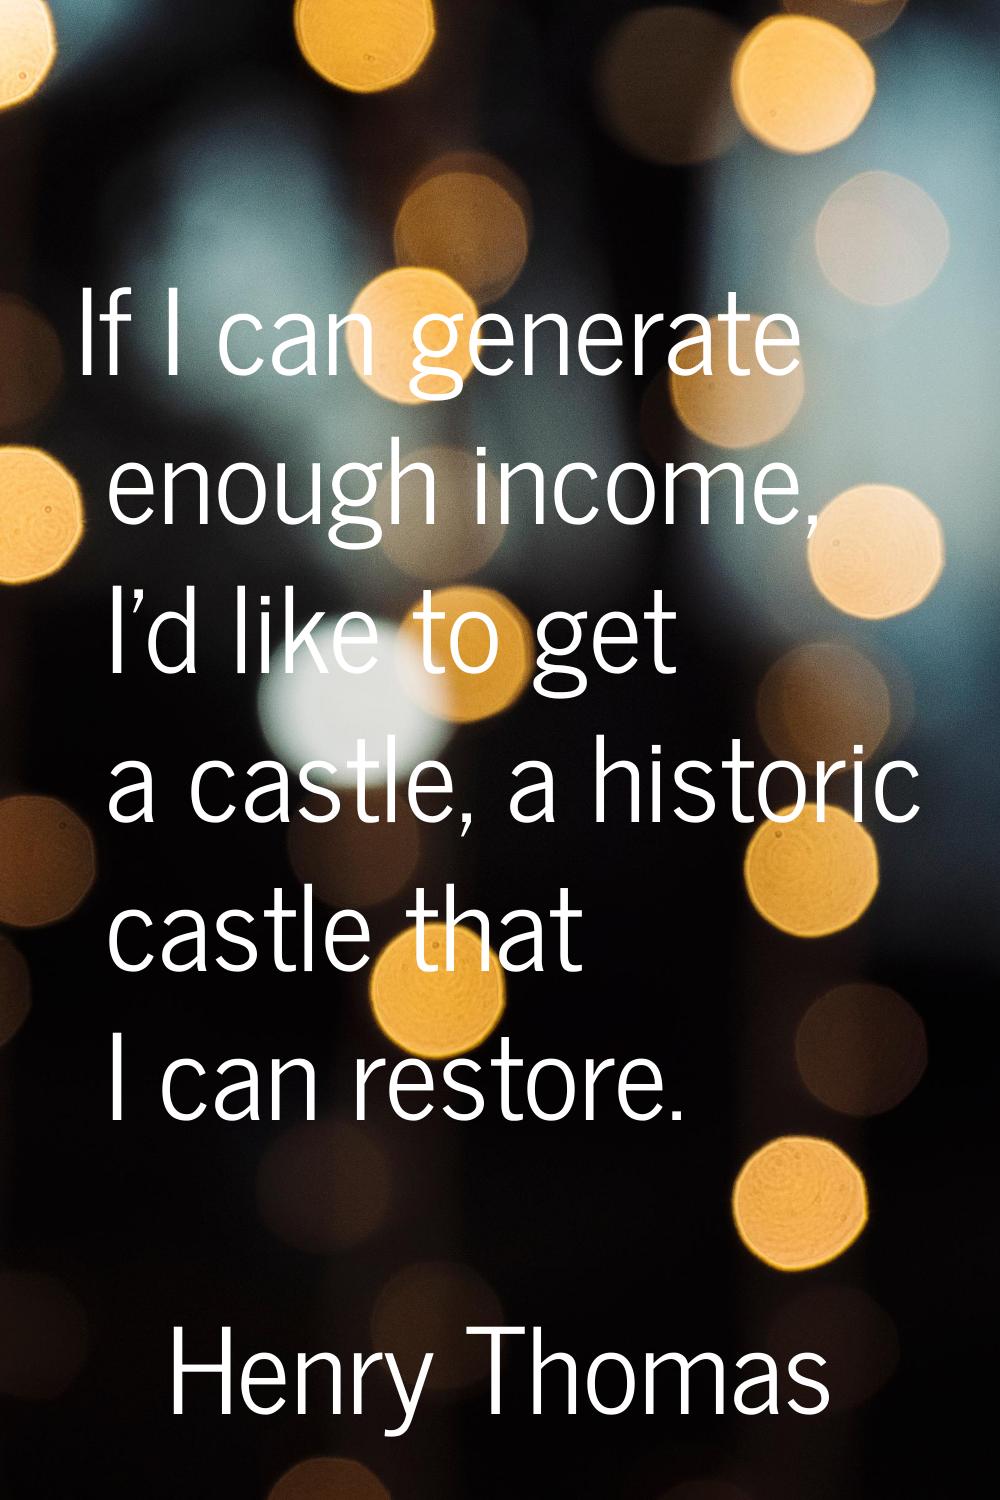 If I can generate enough income, I'd like to get a castle, a historic castle that I can restore.